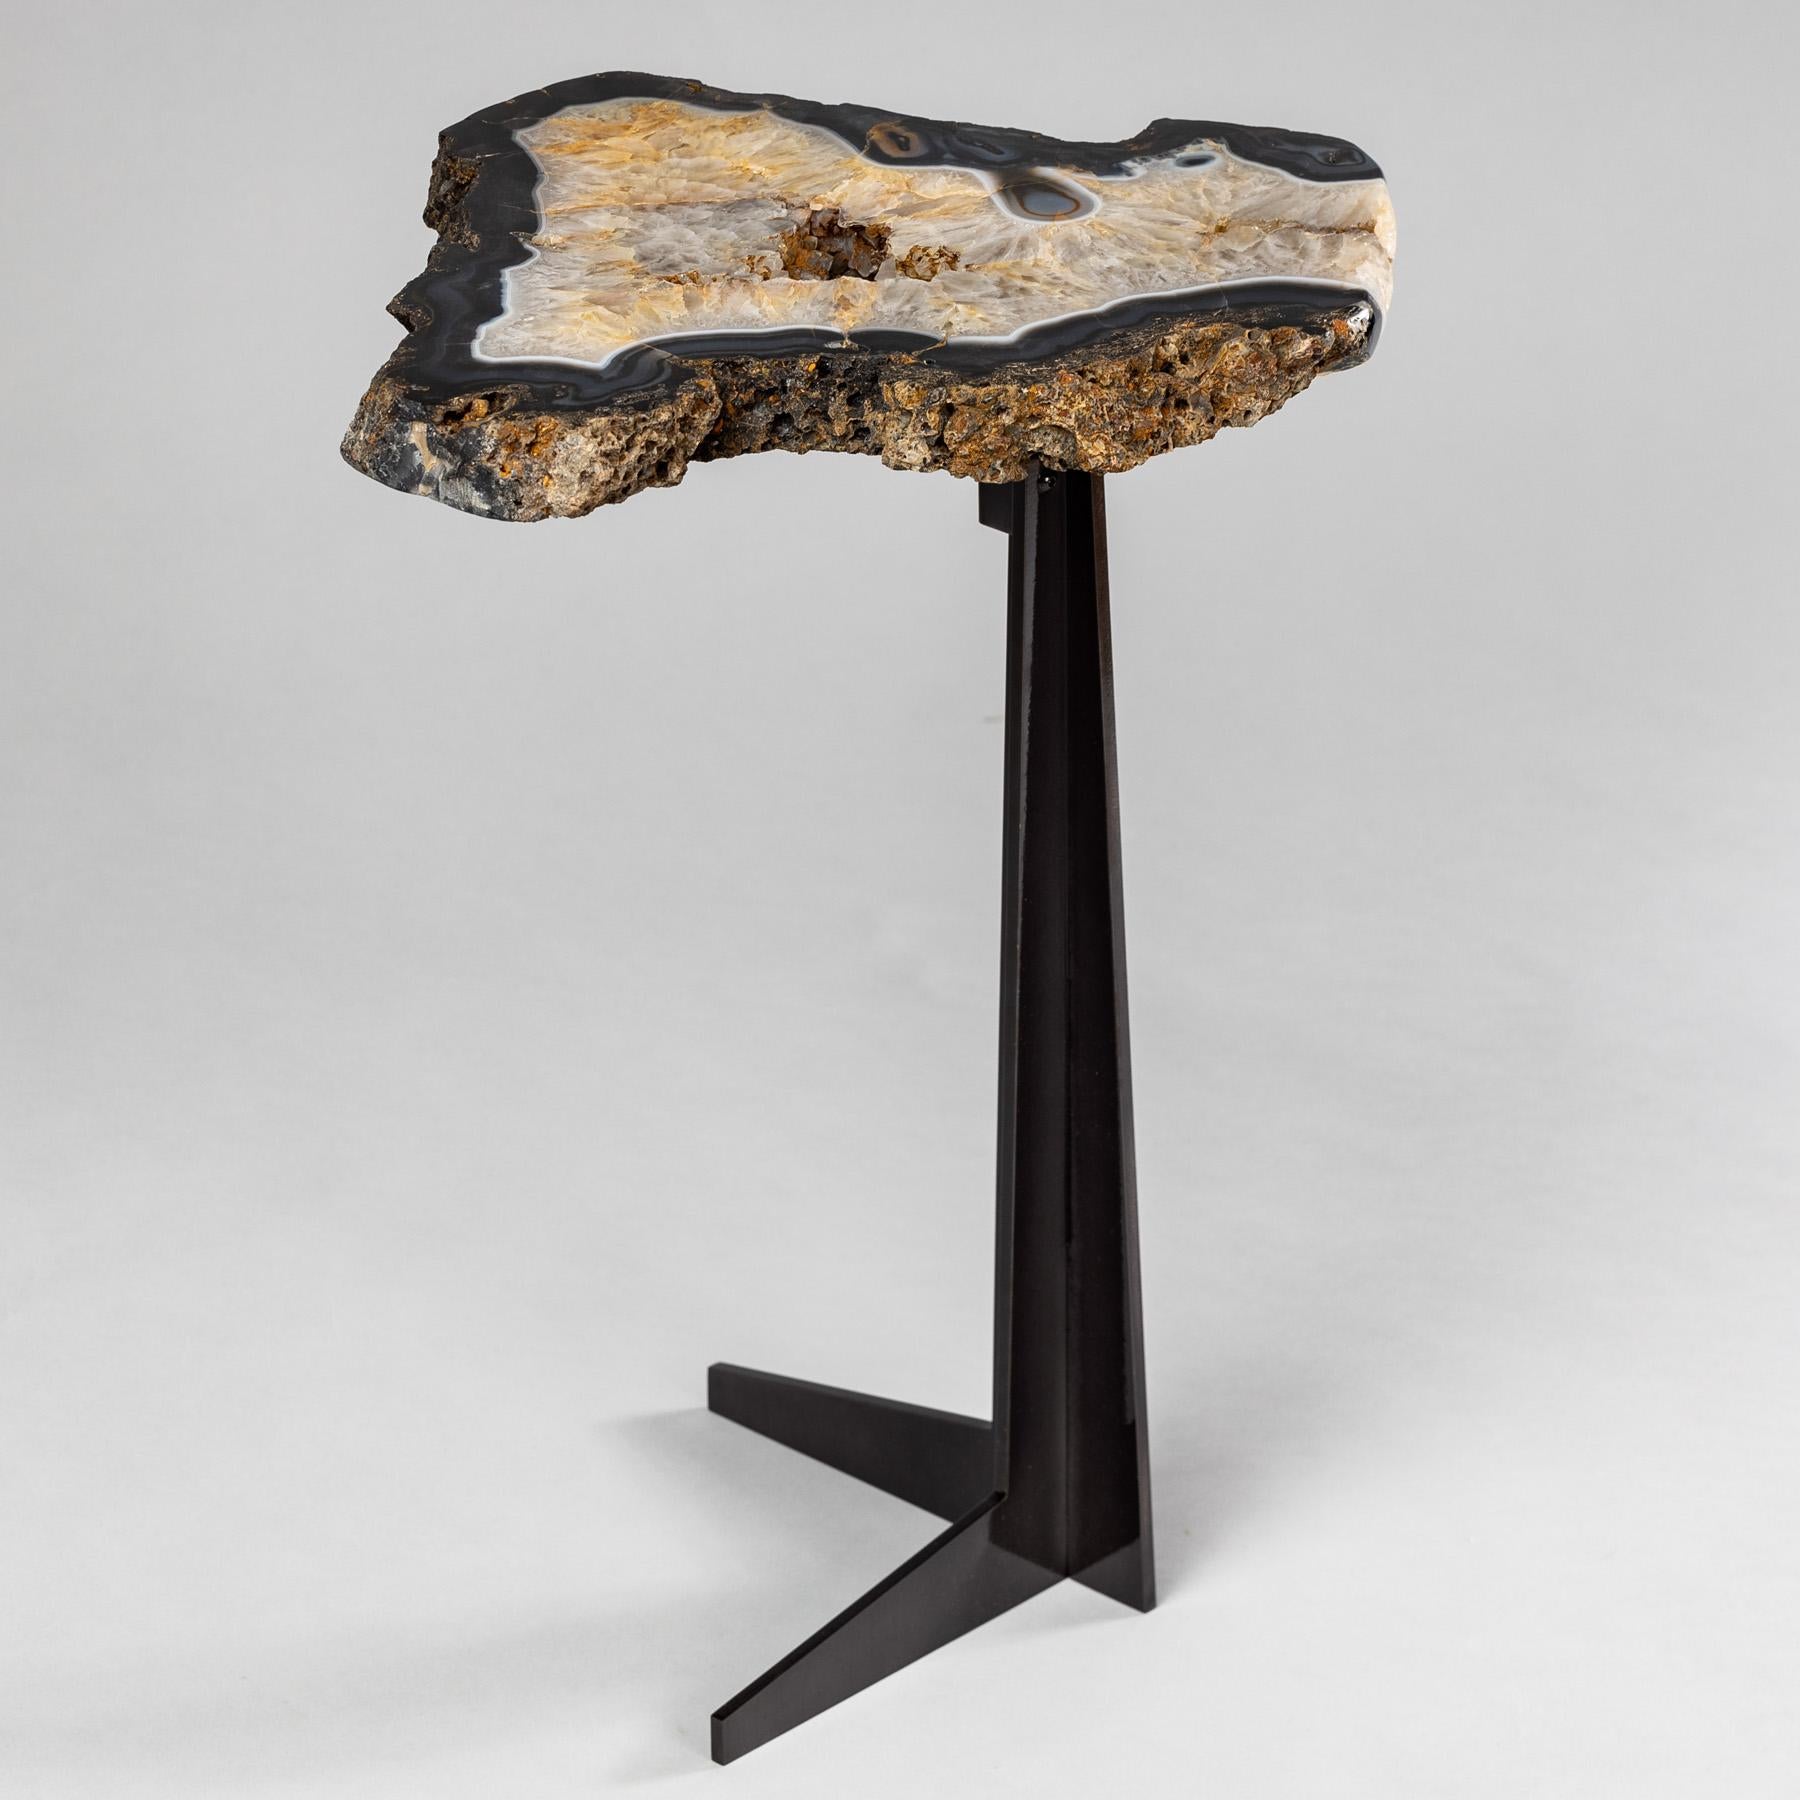 Organic Modern Side or Cocktail Table, Brazilian Agate with Black Color Metal Base